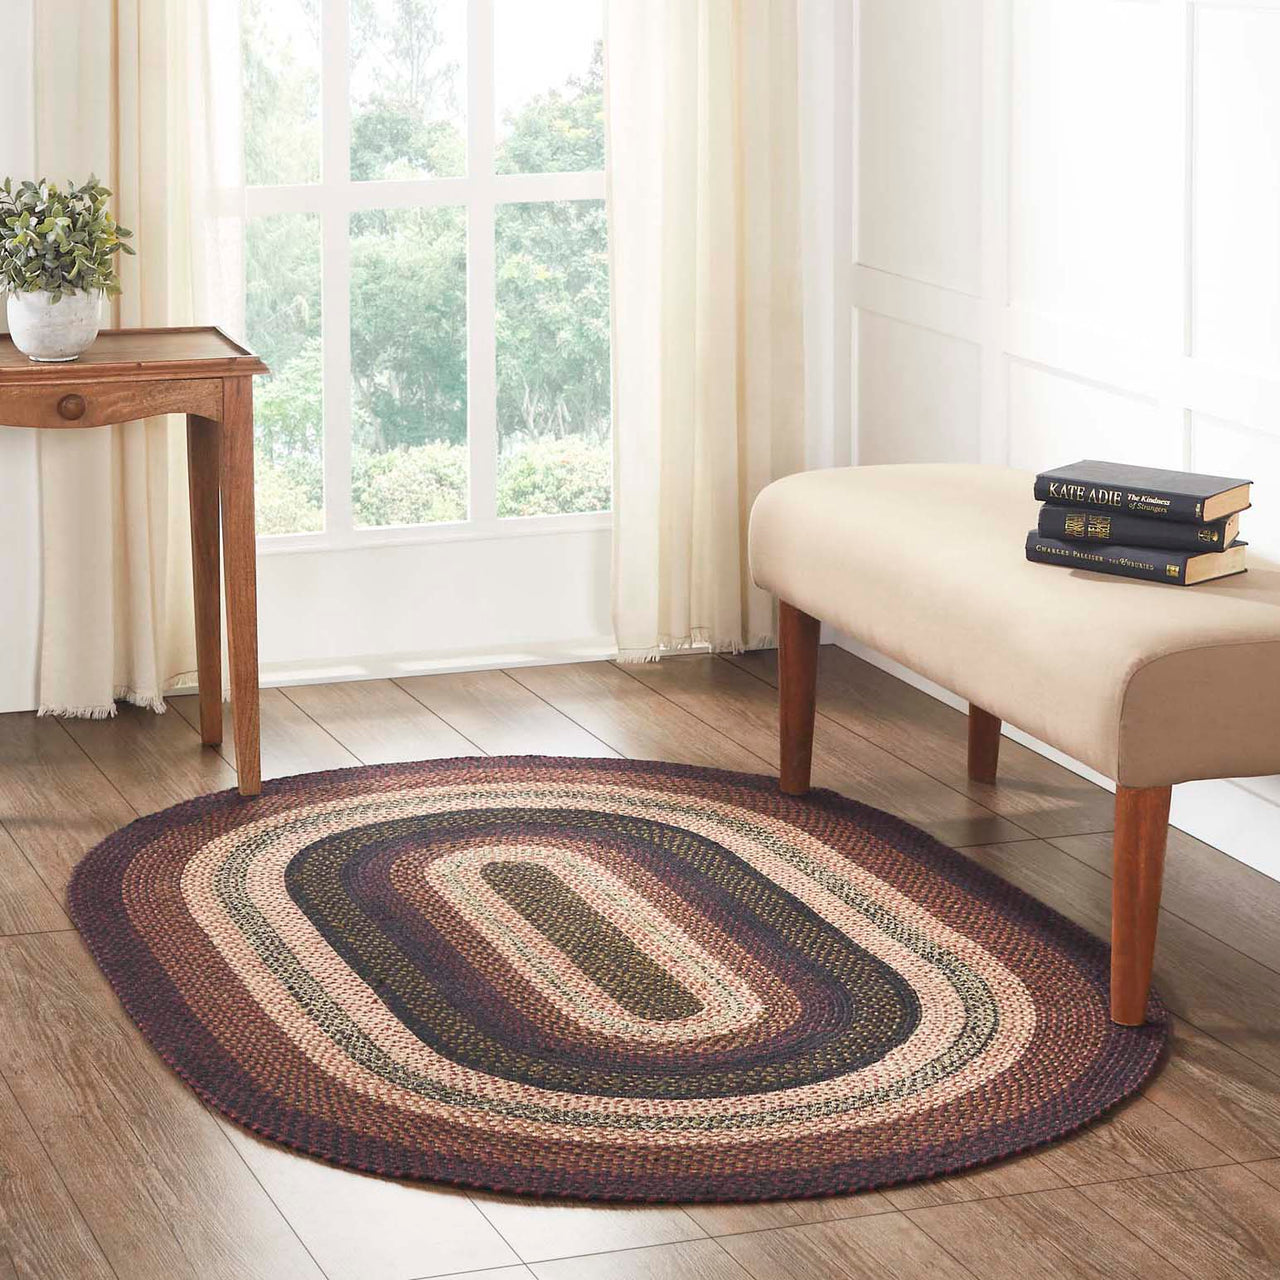 Beckham Jute Braided Rug Oval with Rug Pad 4'x6' VHC Brands